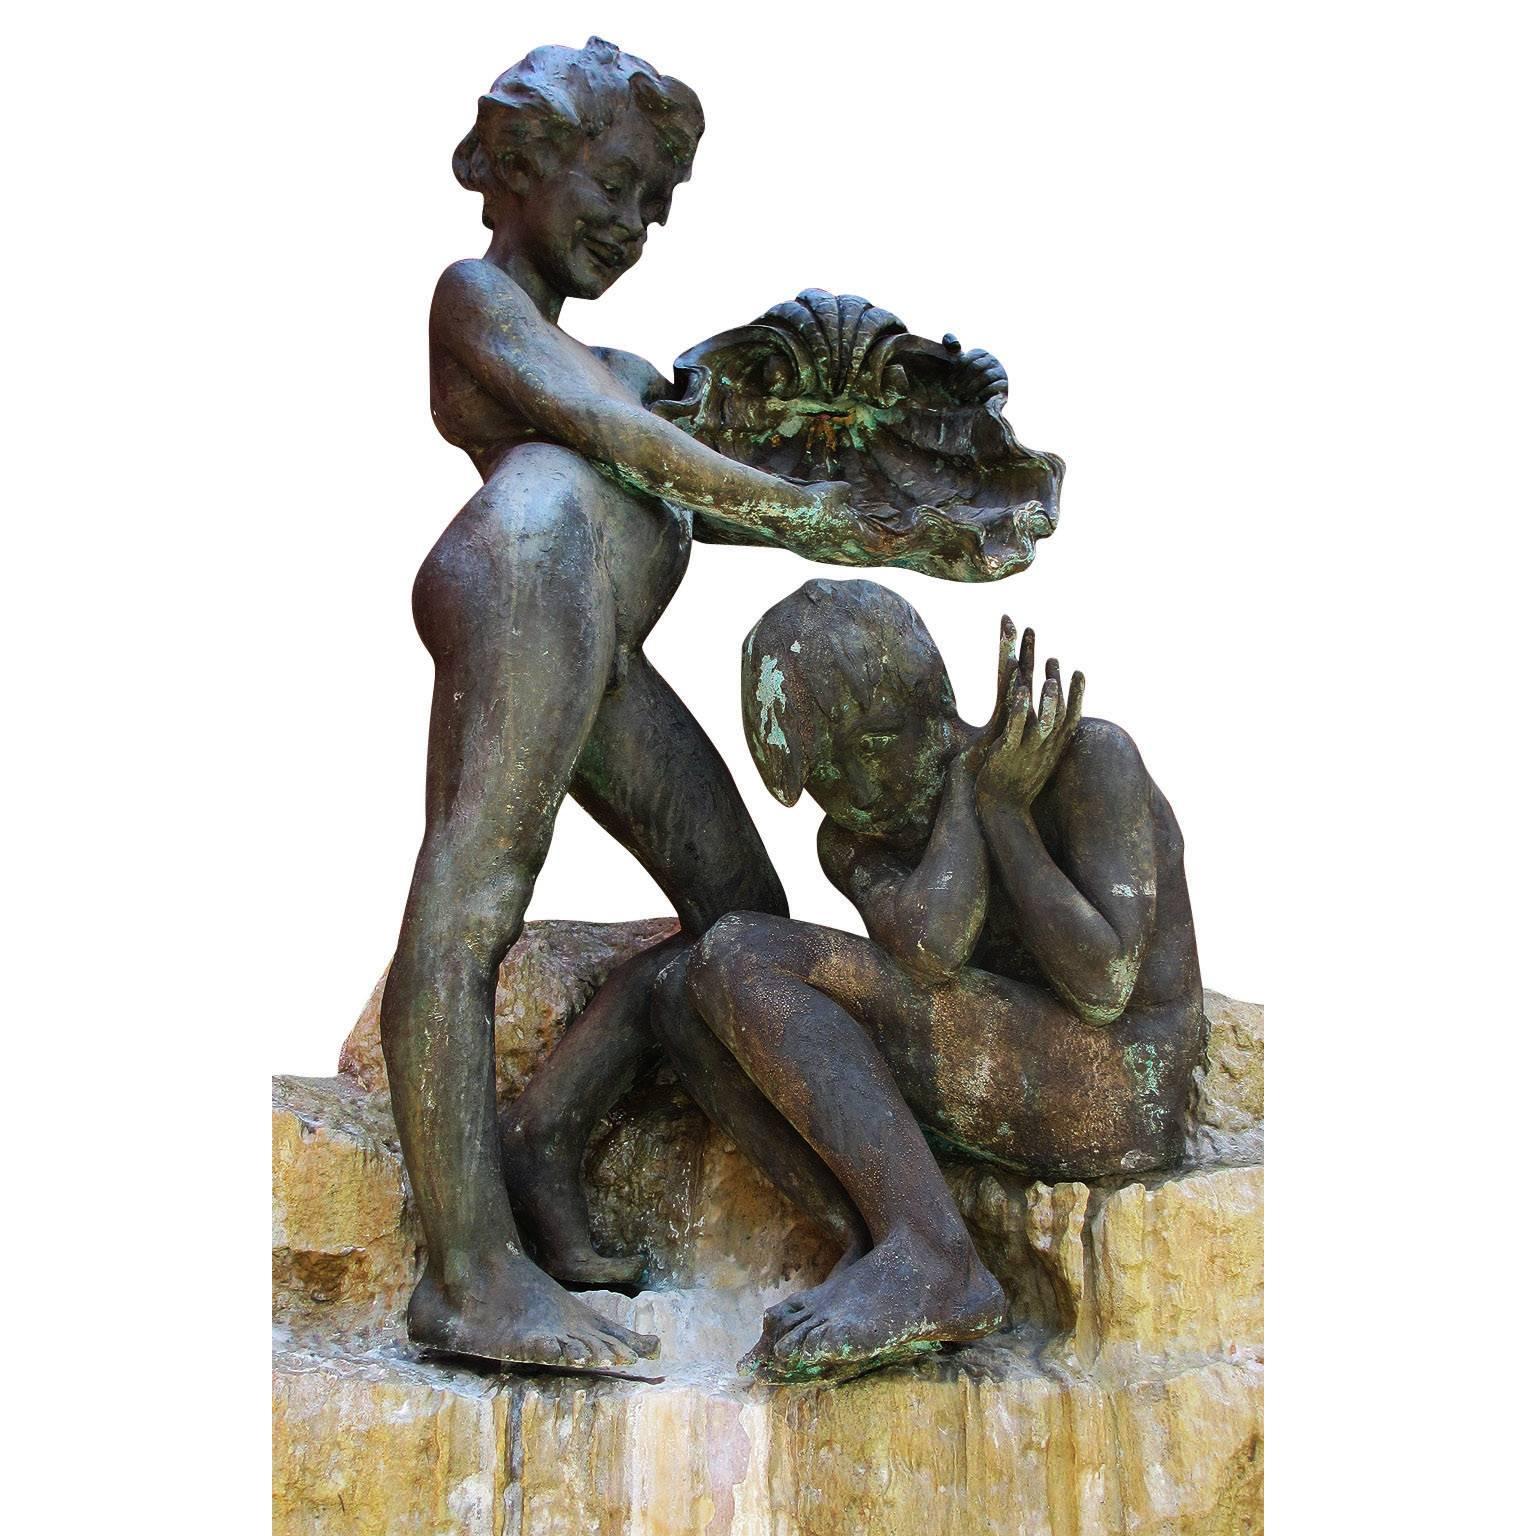 A charming whimsical mid-20th century figural bronze and carved stone sculpture/fountain depicting two young boys, one standing holding a large conch over a sitting and crouching one below, both above a stepped stone base with carvings of lily pods.